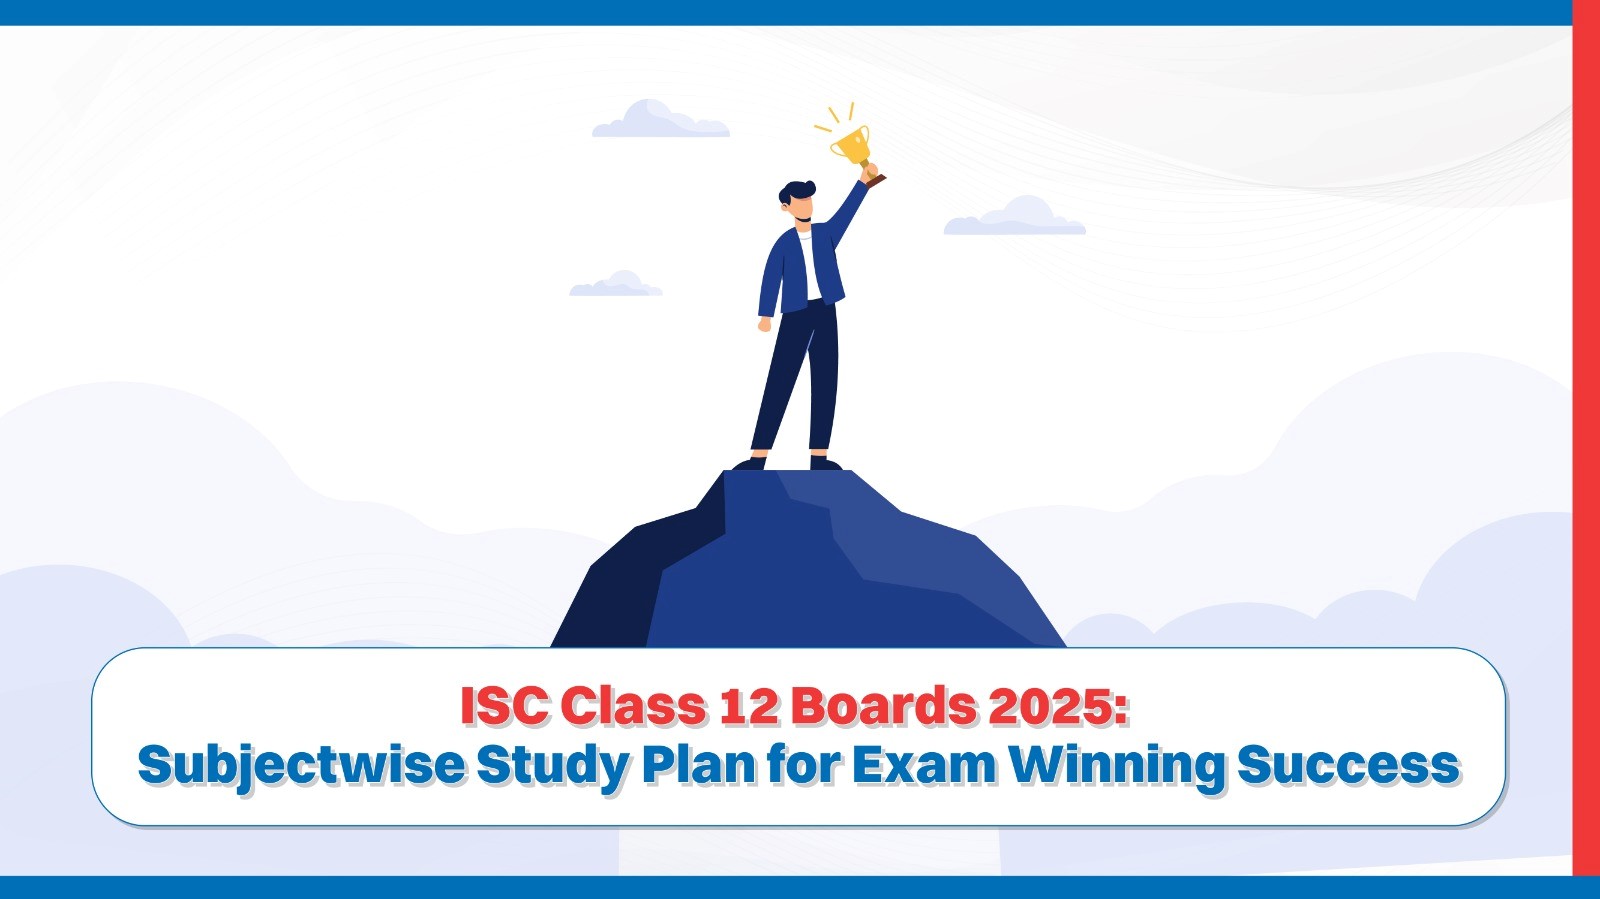 ISC Class 12 Boards 2025: Subject wise Study Plan for Exam Winning Success